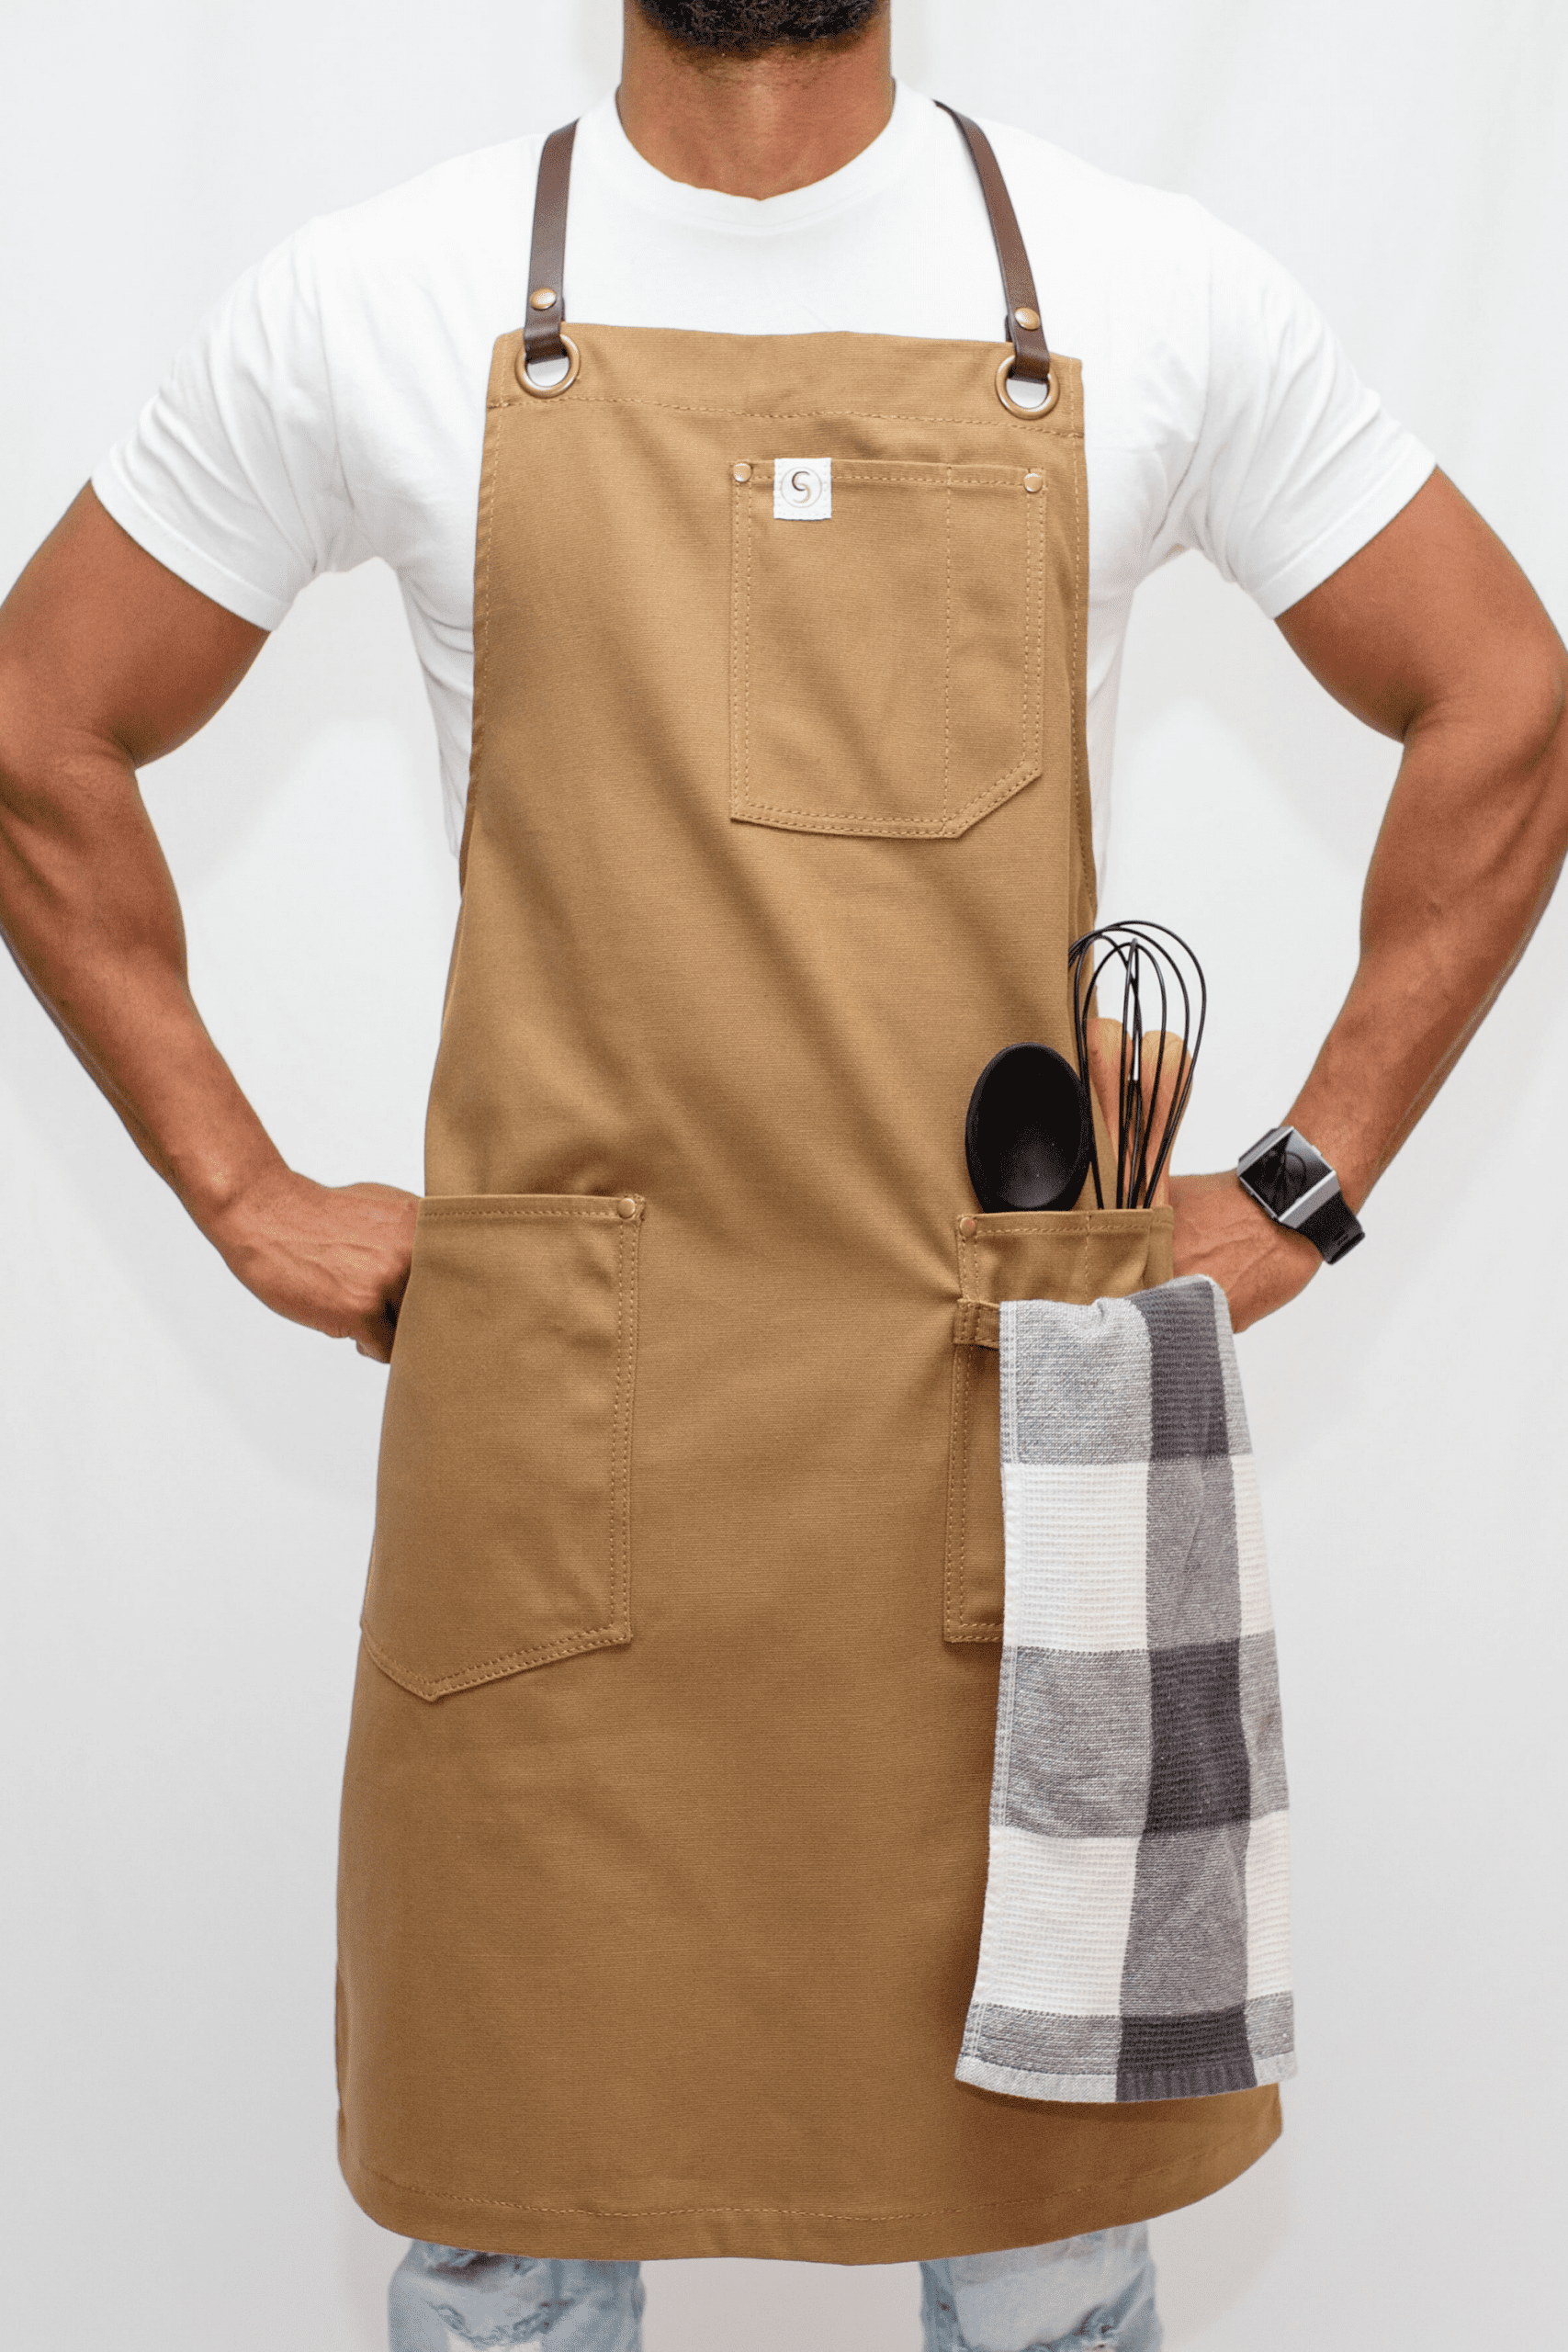 Chef’s Satchel Apron with Leather Straps Northwestern Cutlery